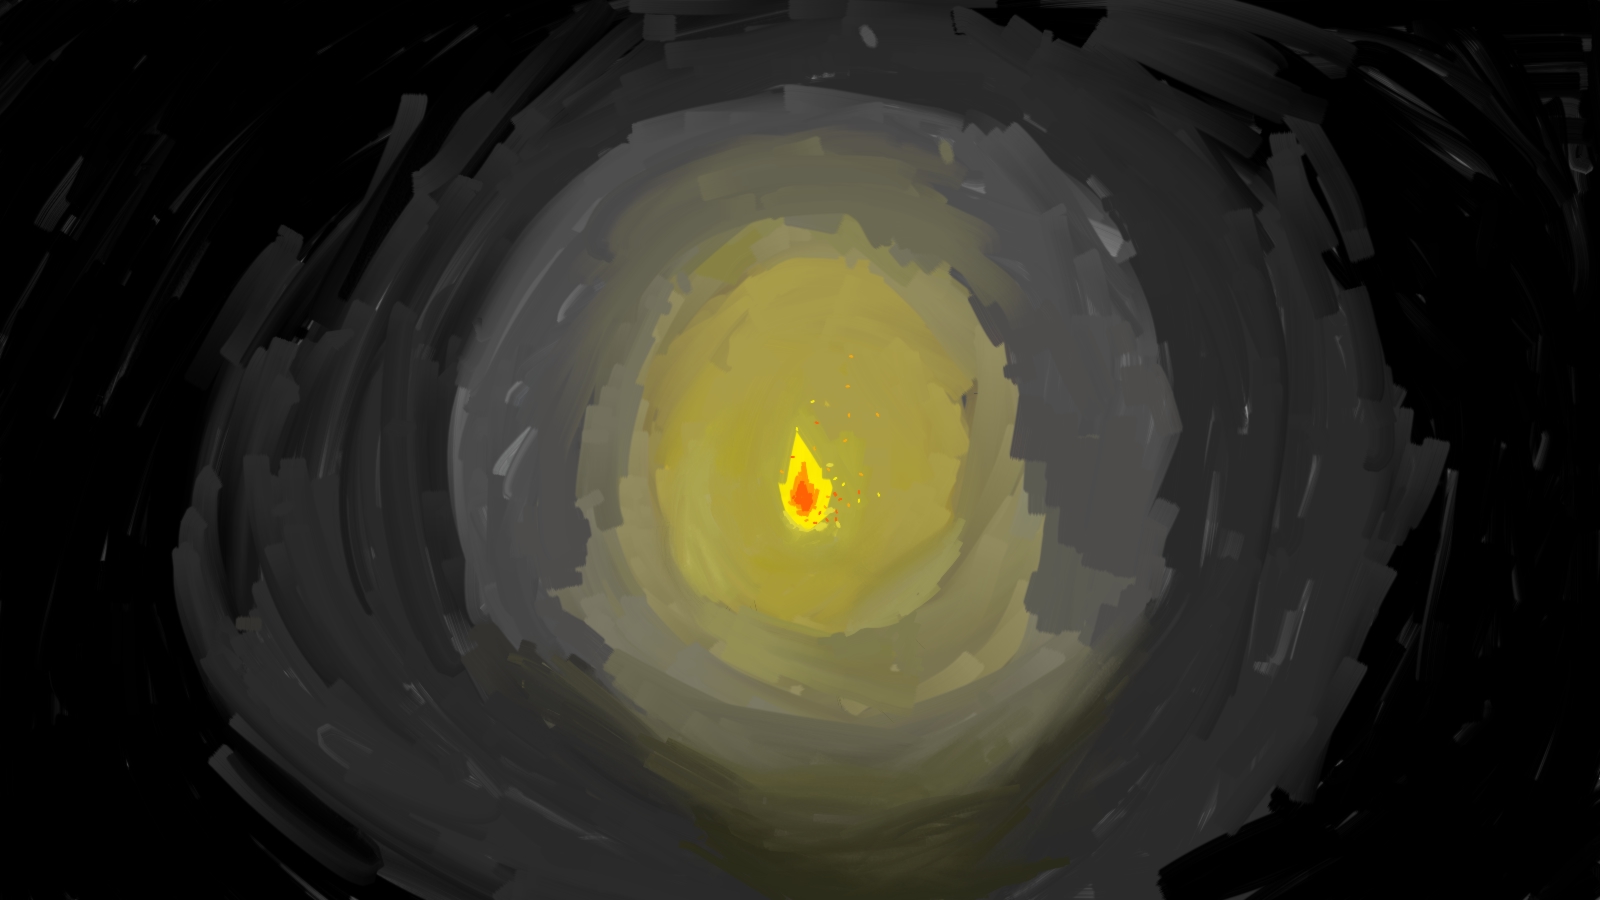 my first digitally made painting of a lone flame in the dark losing its' embers